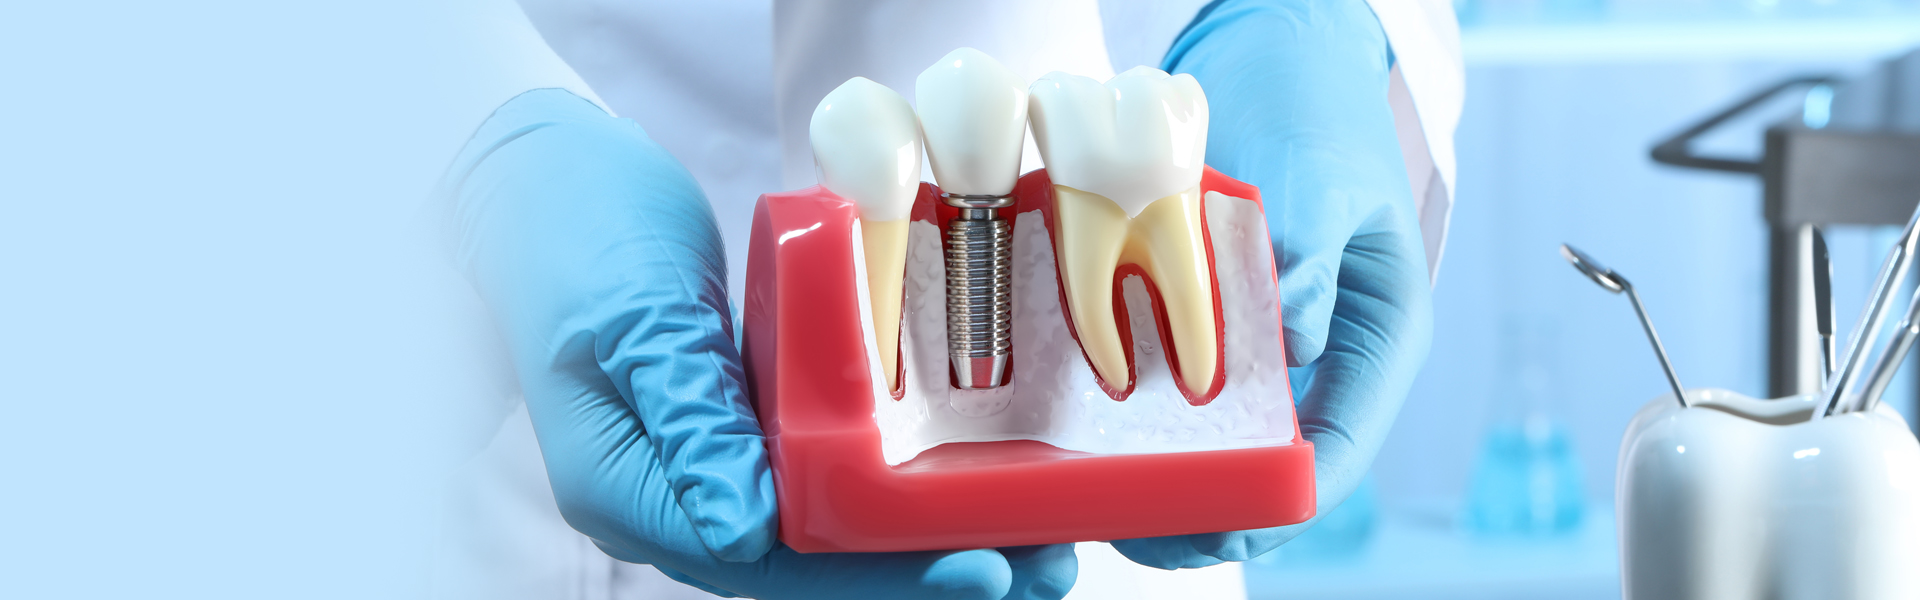 What Are the Alternatives to All-on-4 for Full Mouth Tooth Replacement?